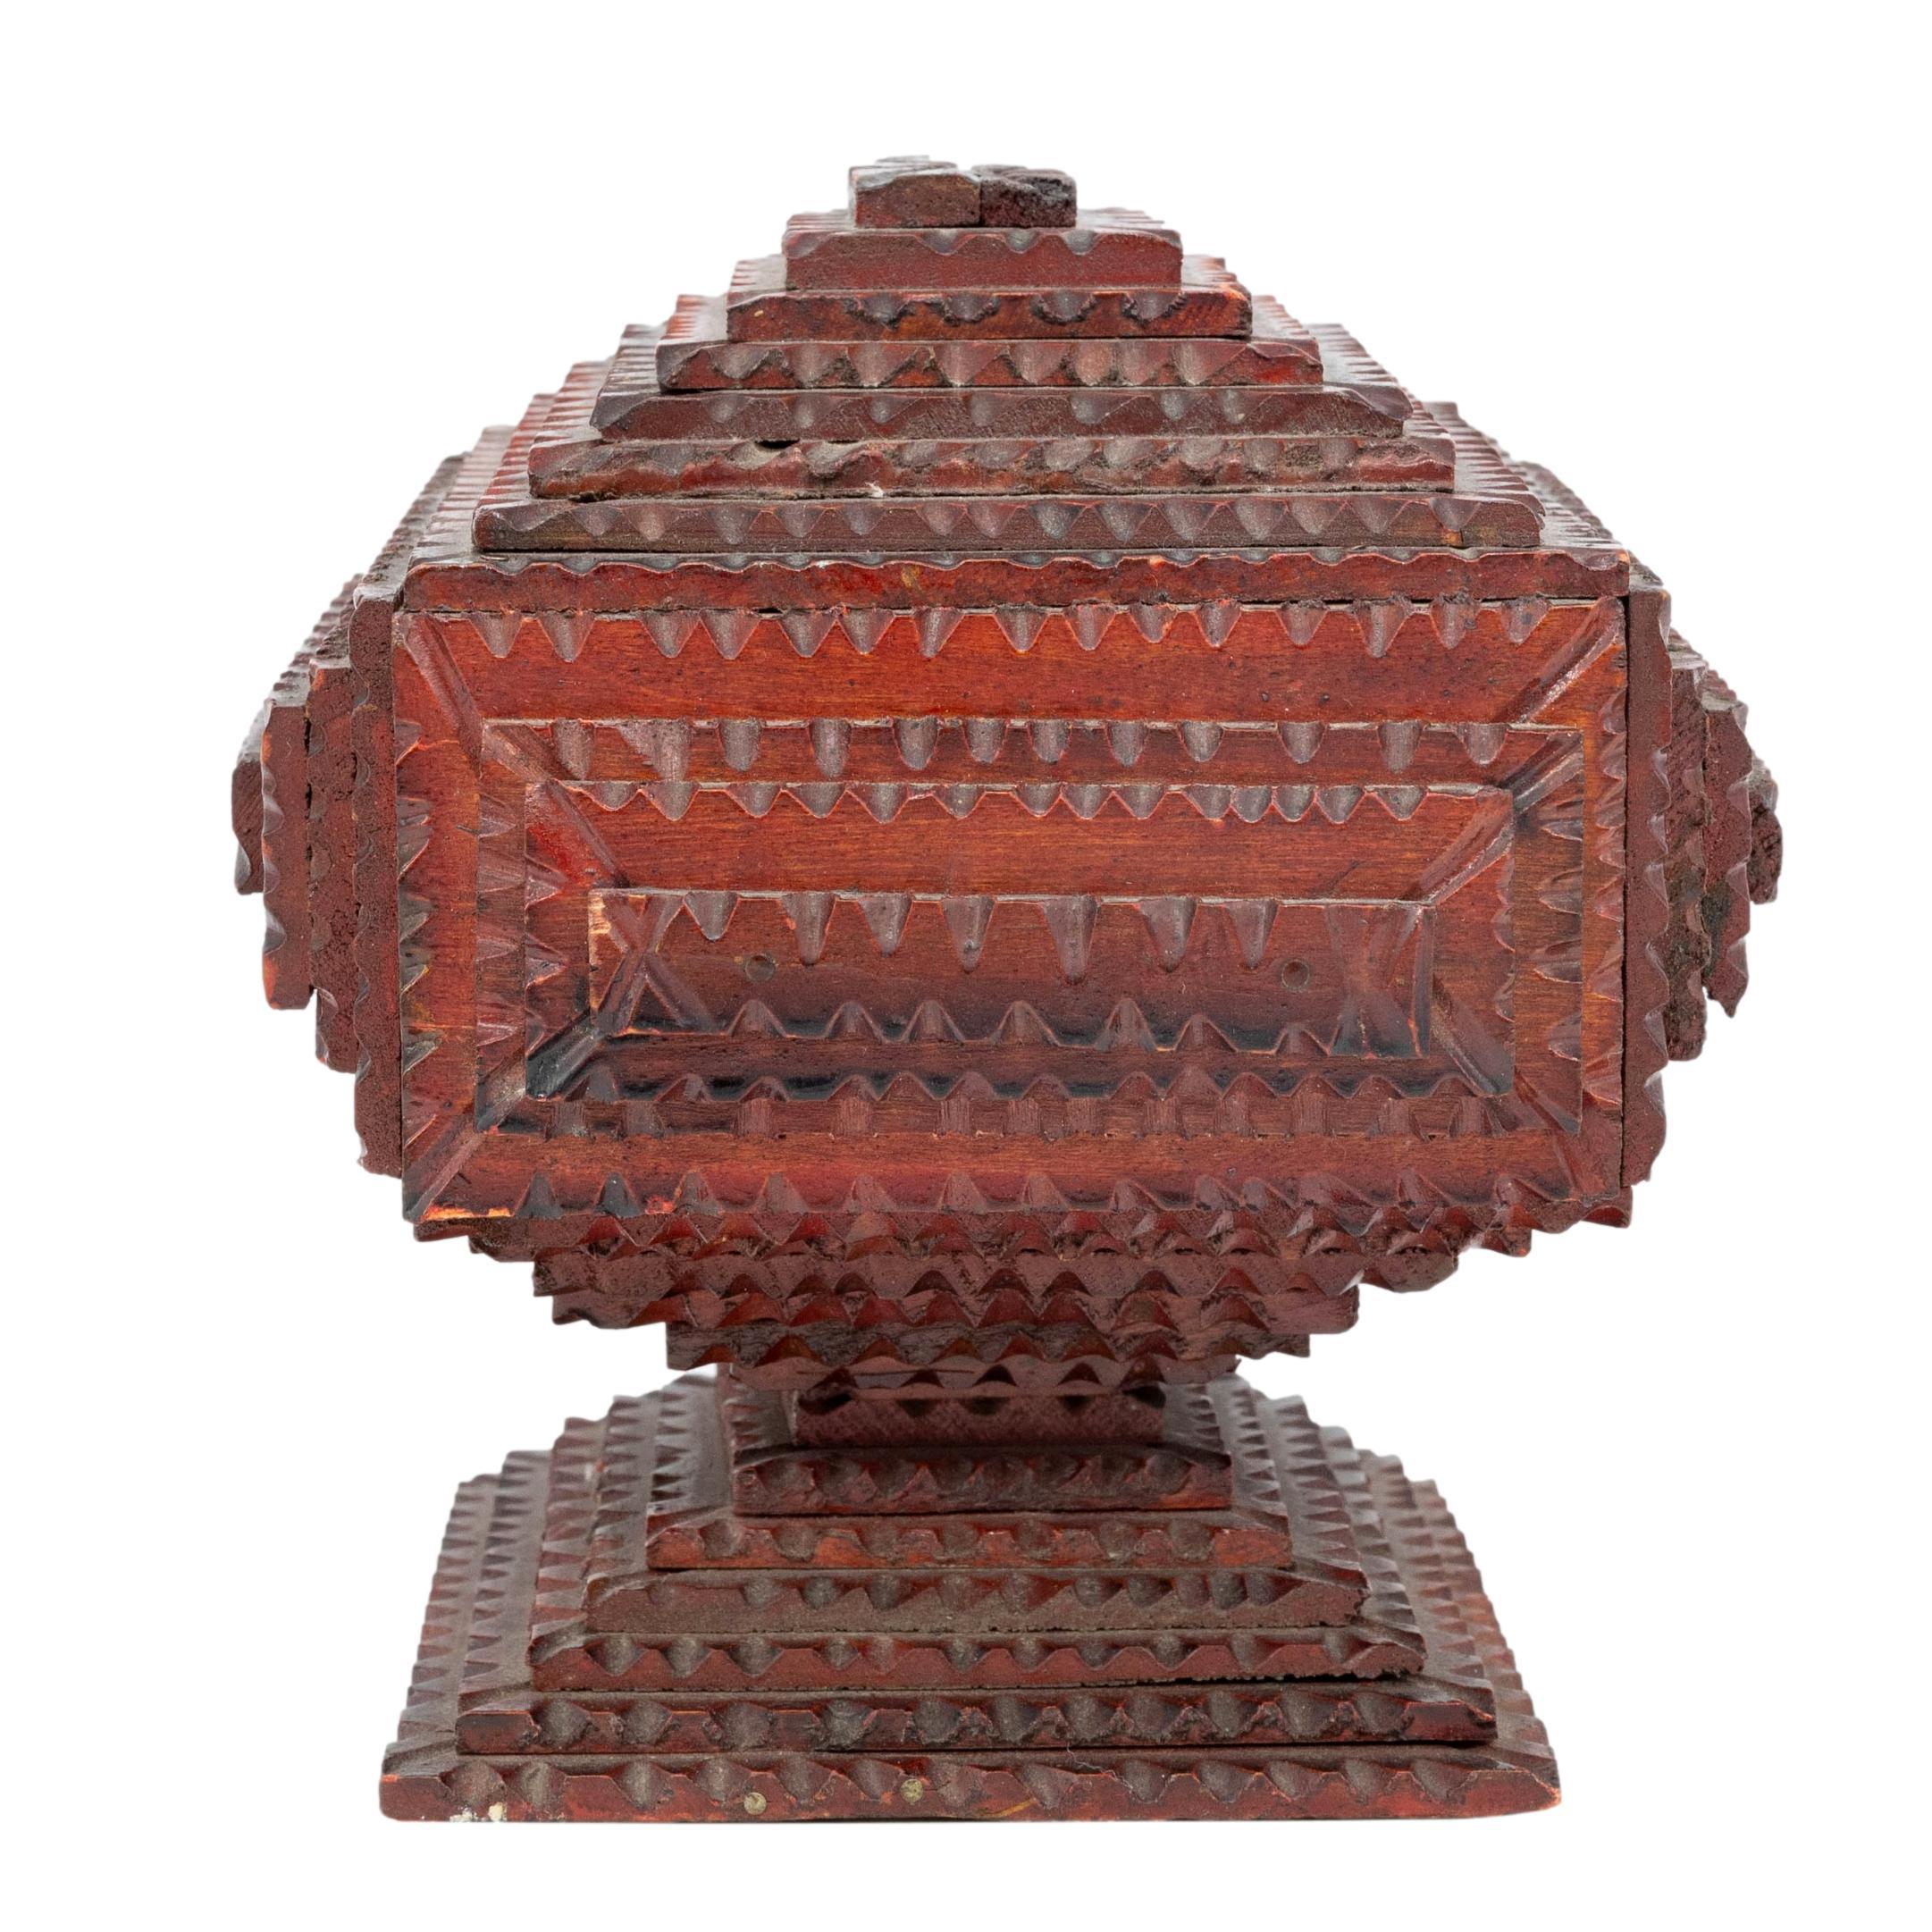 Tramp Art pedestal box made from wooden cigar boxes, of pyramid form, with jigsaw tooth notching and carved pyramids, retaining original red painted surface, with cigar drawer, American, ca. 1920.